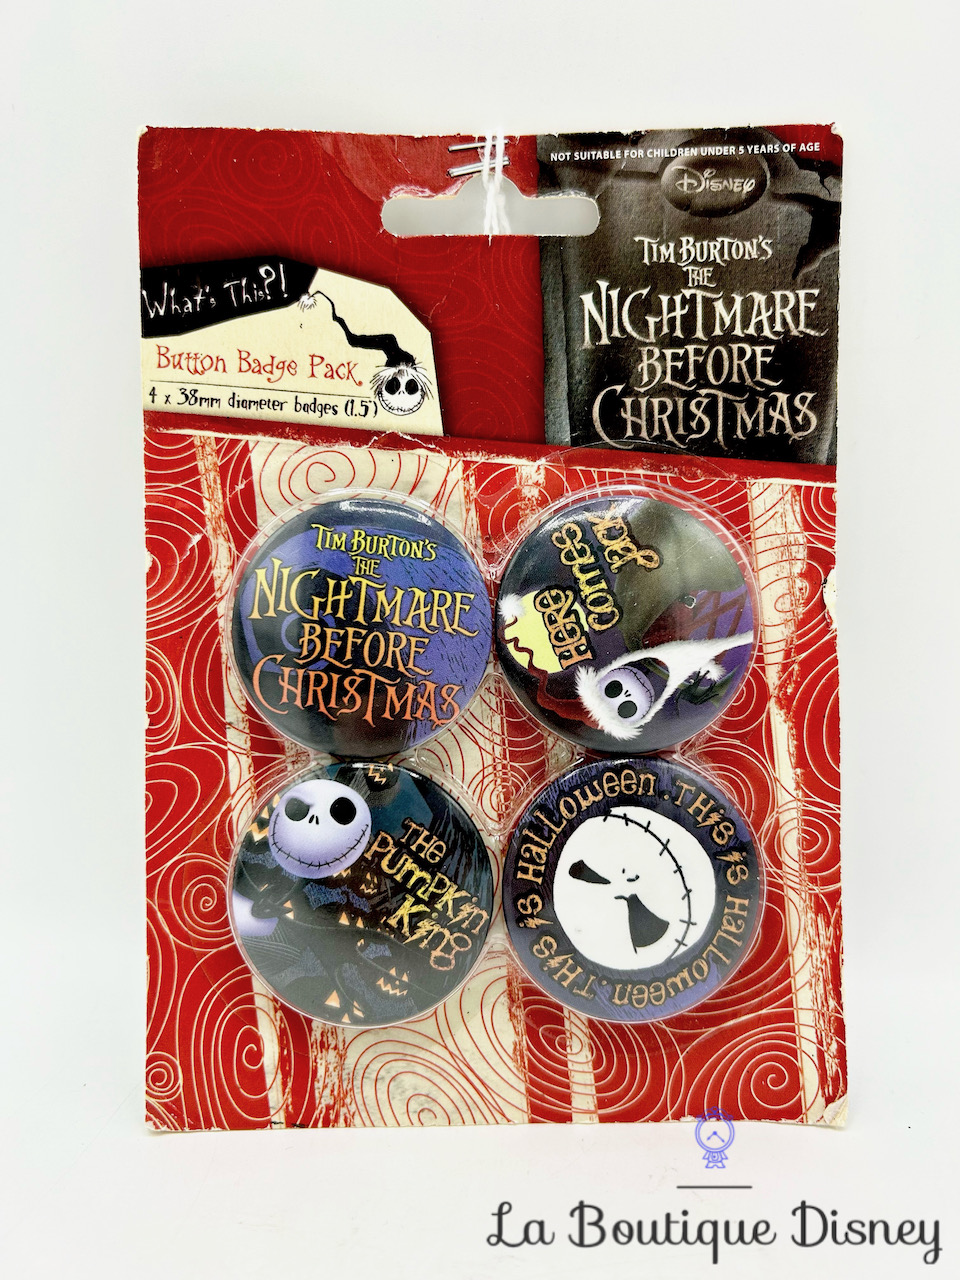 badges-button-pack-nightmare-before-christmas-disney-pyramid-posters-jack-skelington-broche-1